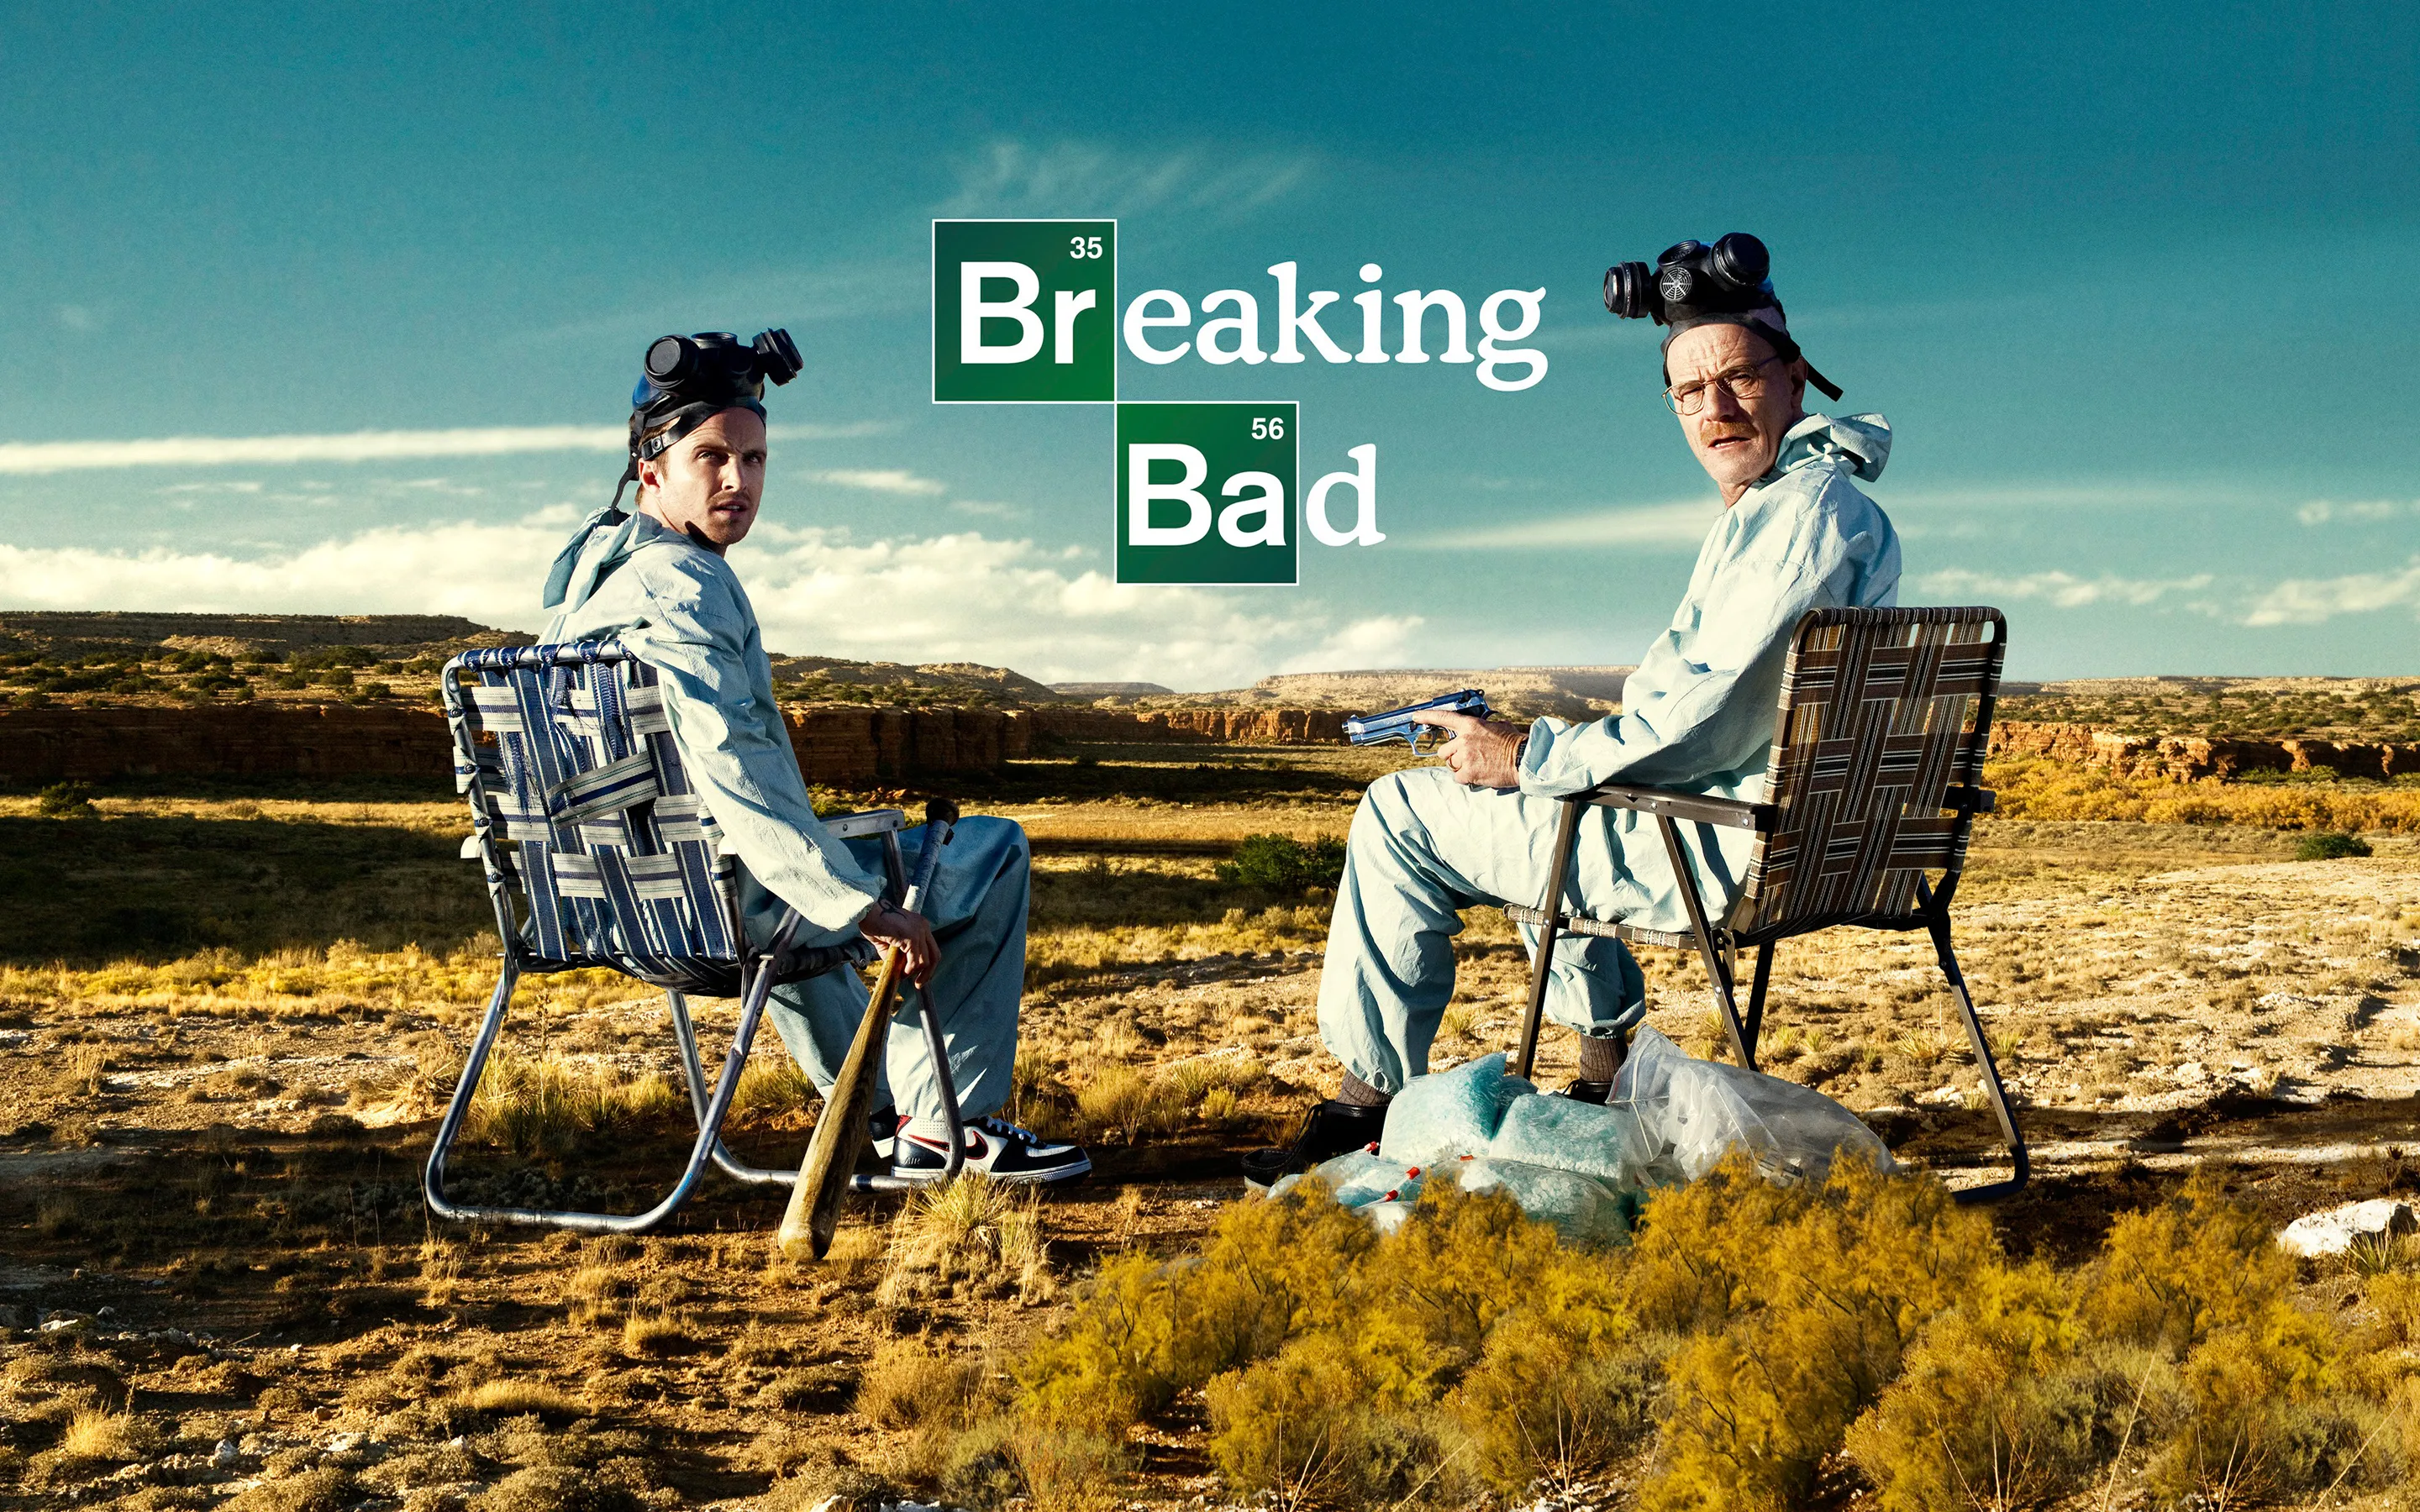 Breaking Bad' Fun Facts: Cool, Interesting Things You Didn't Know